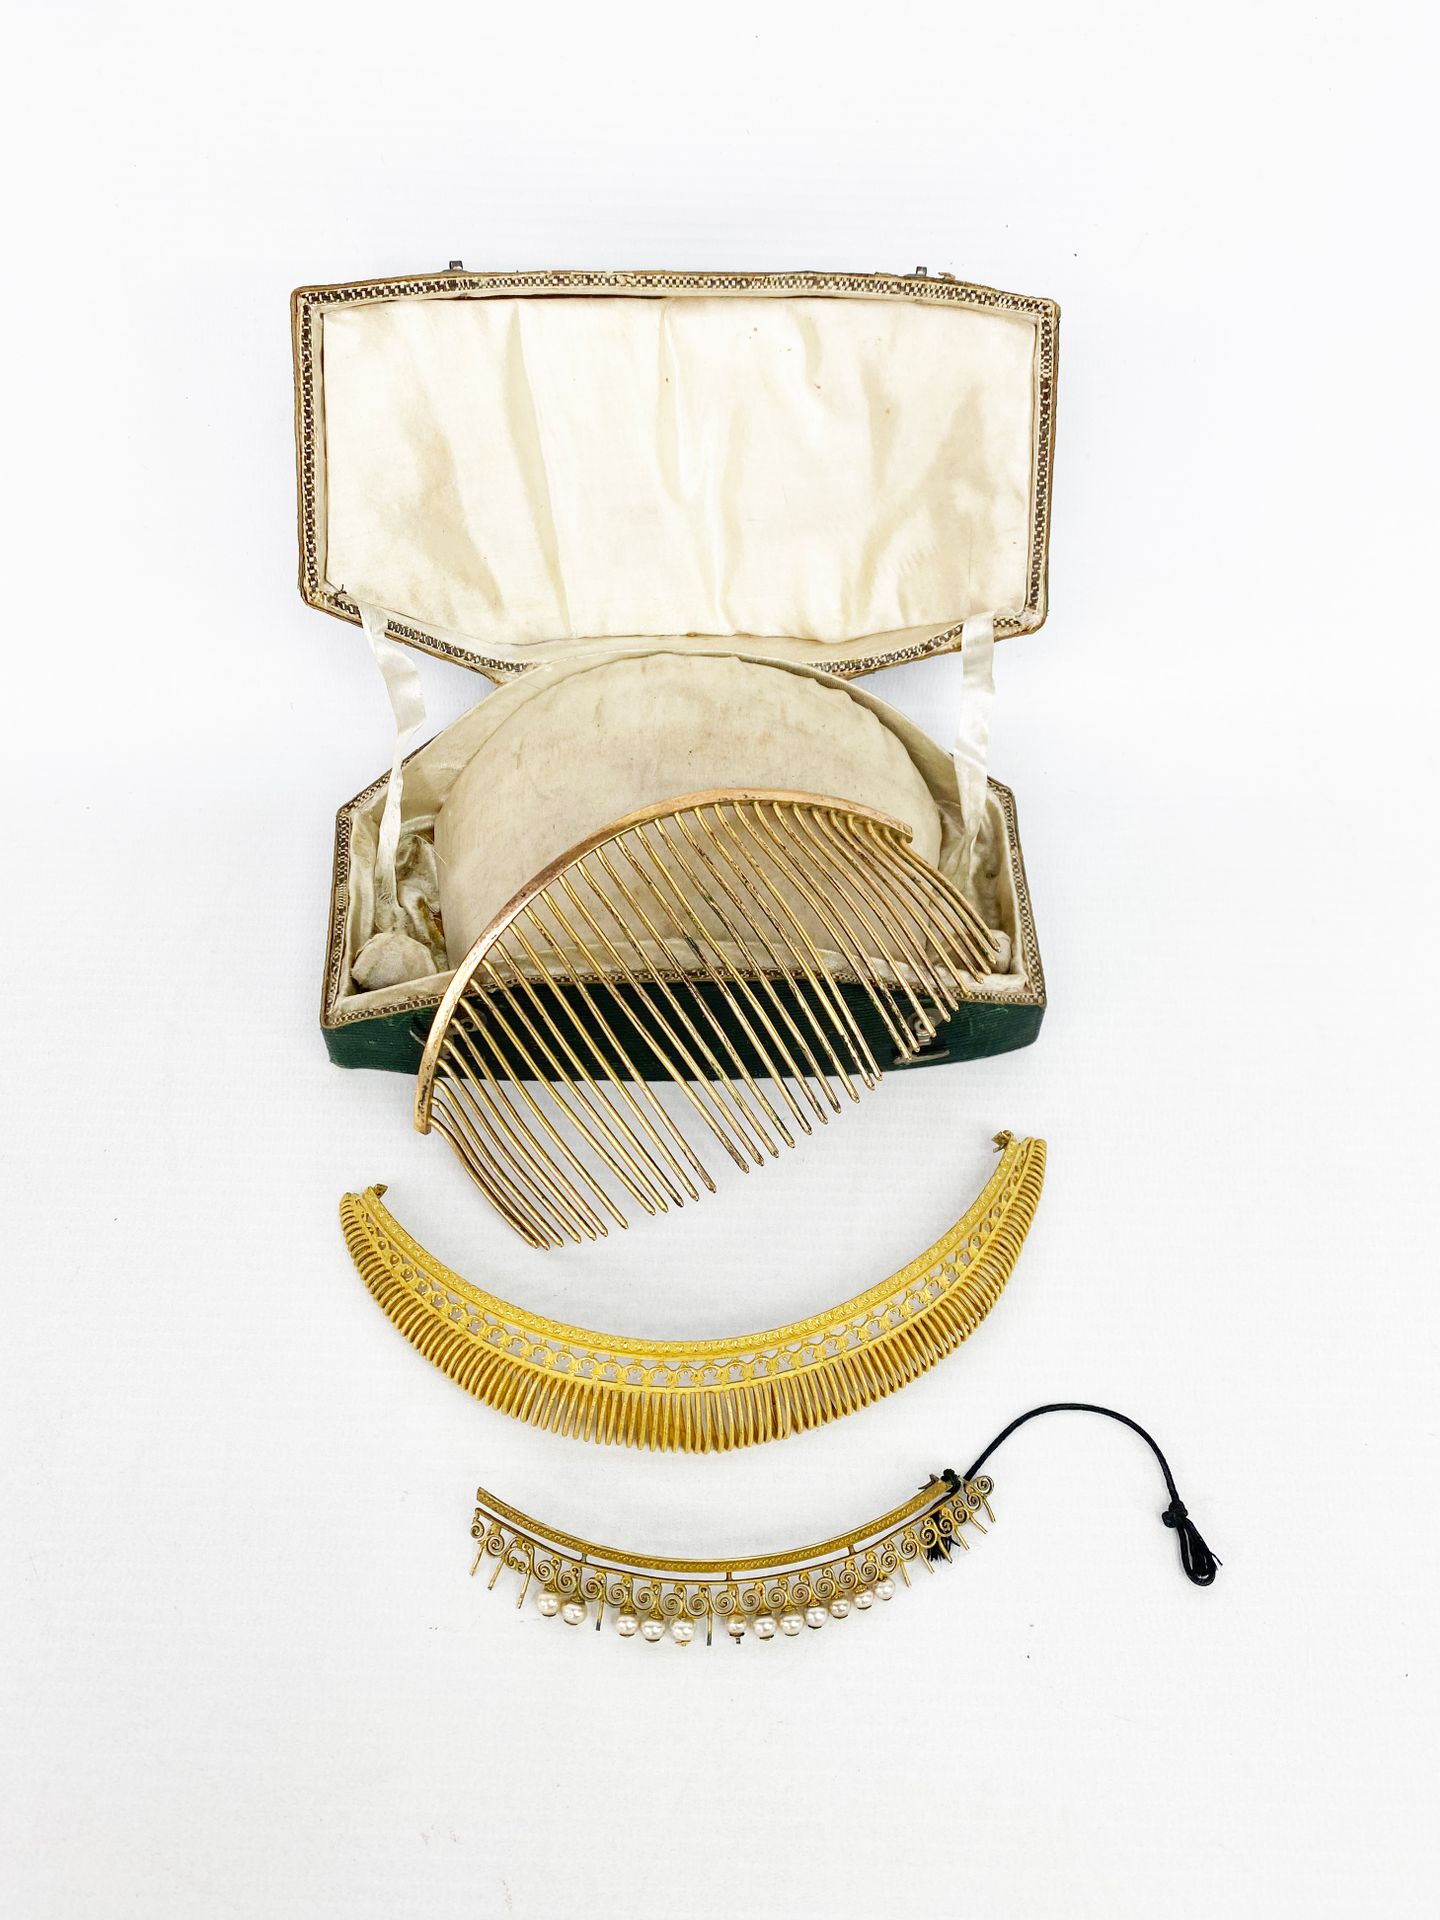 Null Gilded metal tiara with transformations. 

In its leather case.

Accidents.